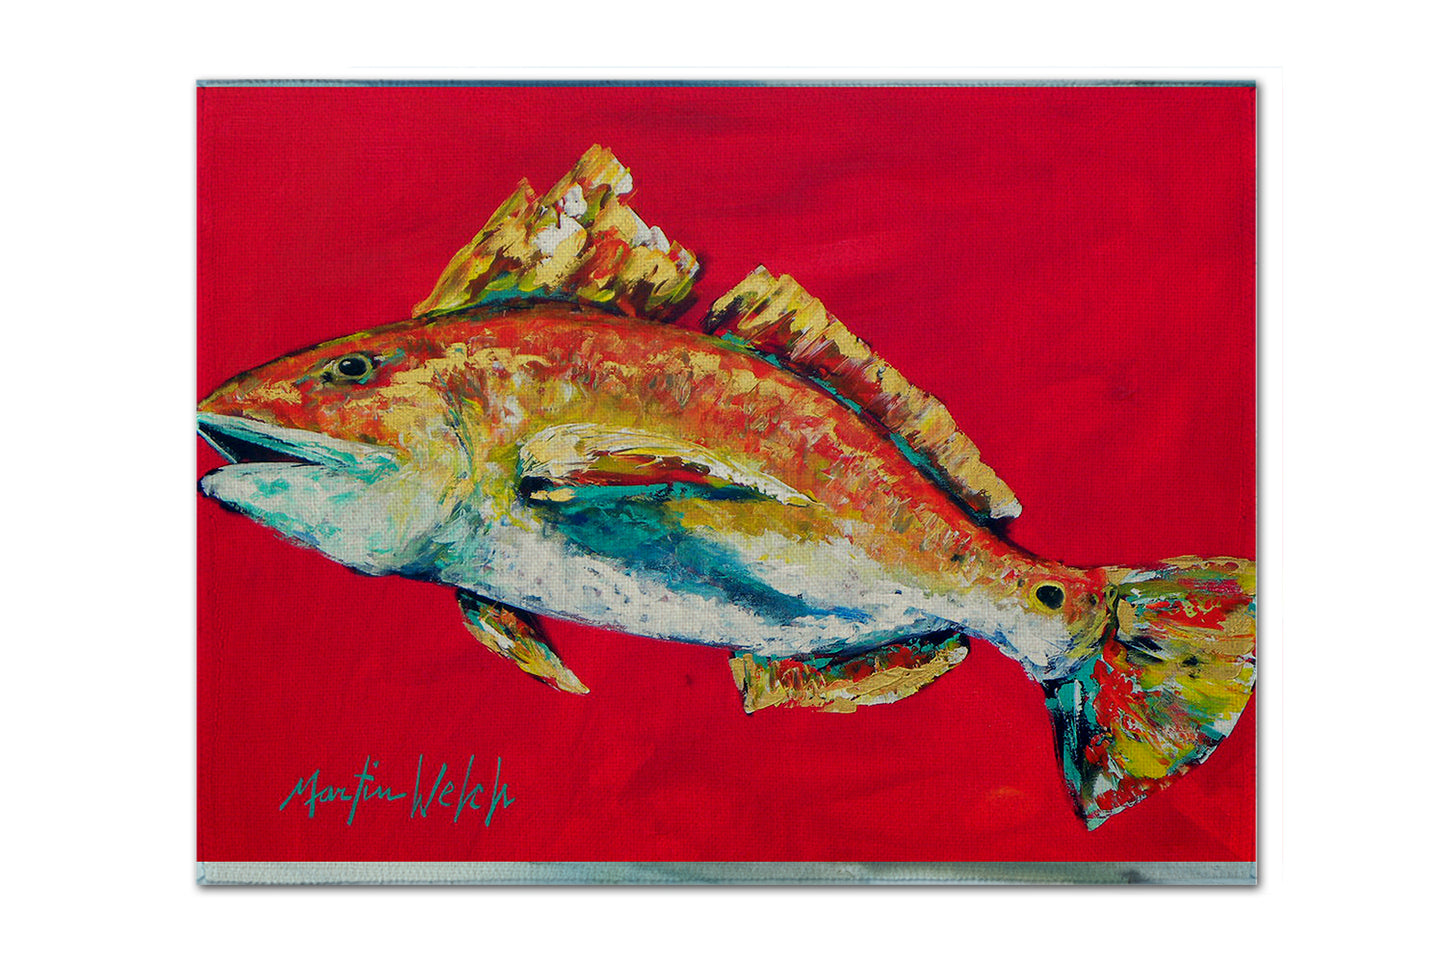 Buy this Fish - Red Fish Woo Hoo Fabric Placemat